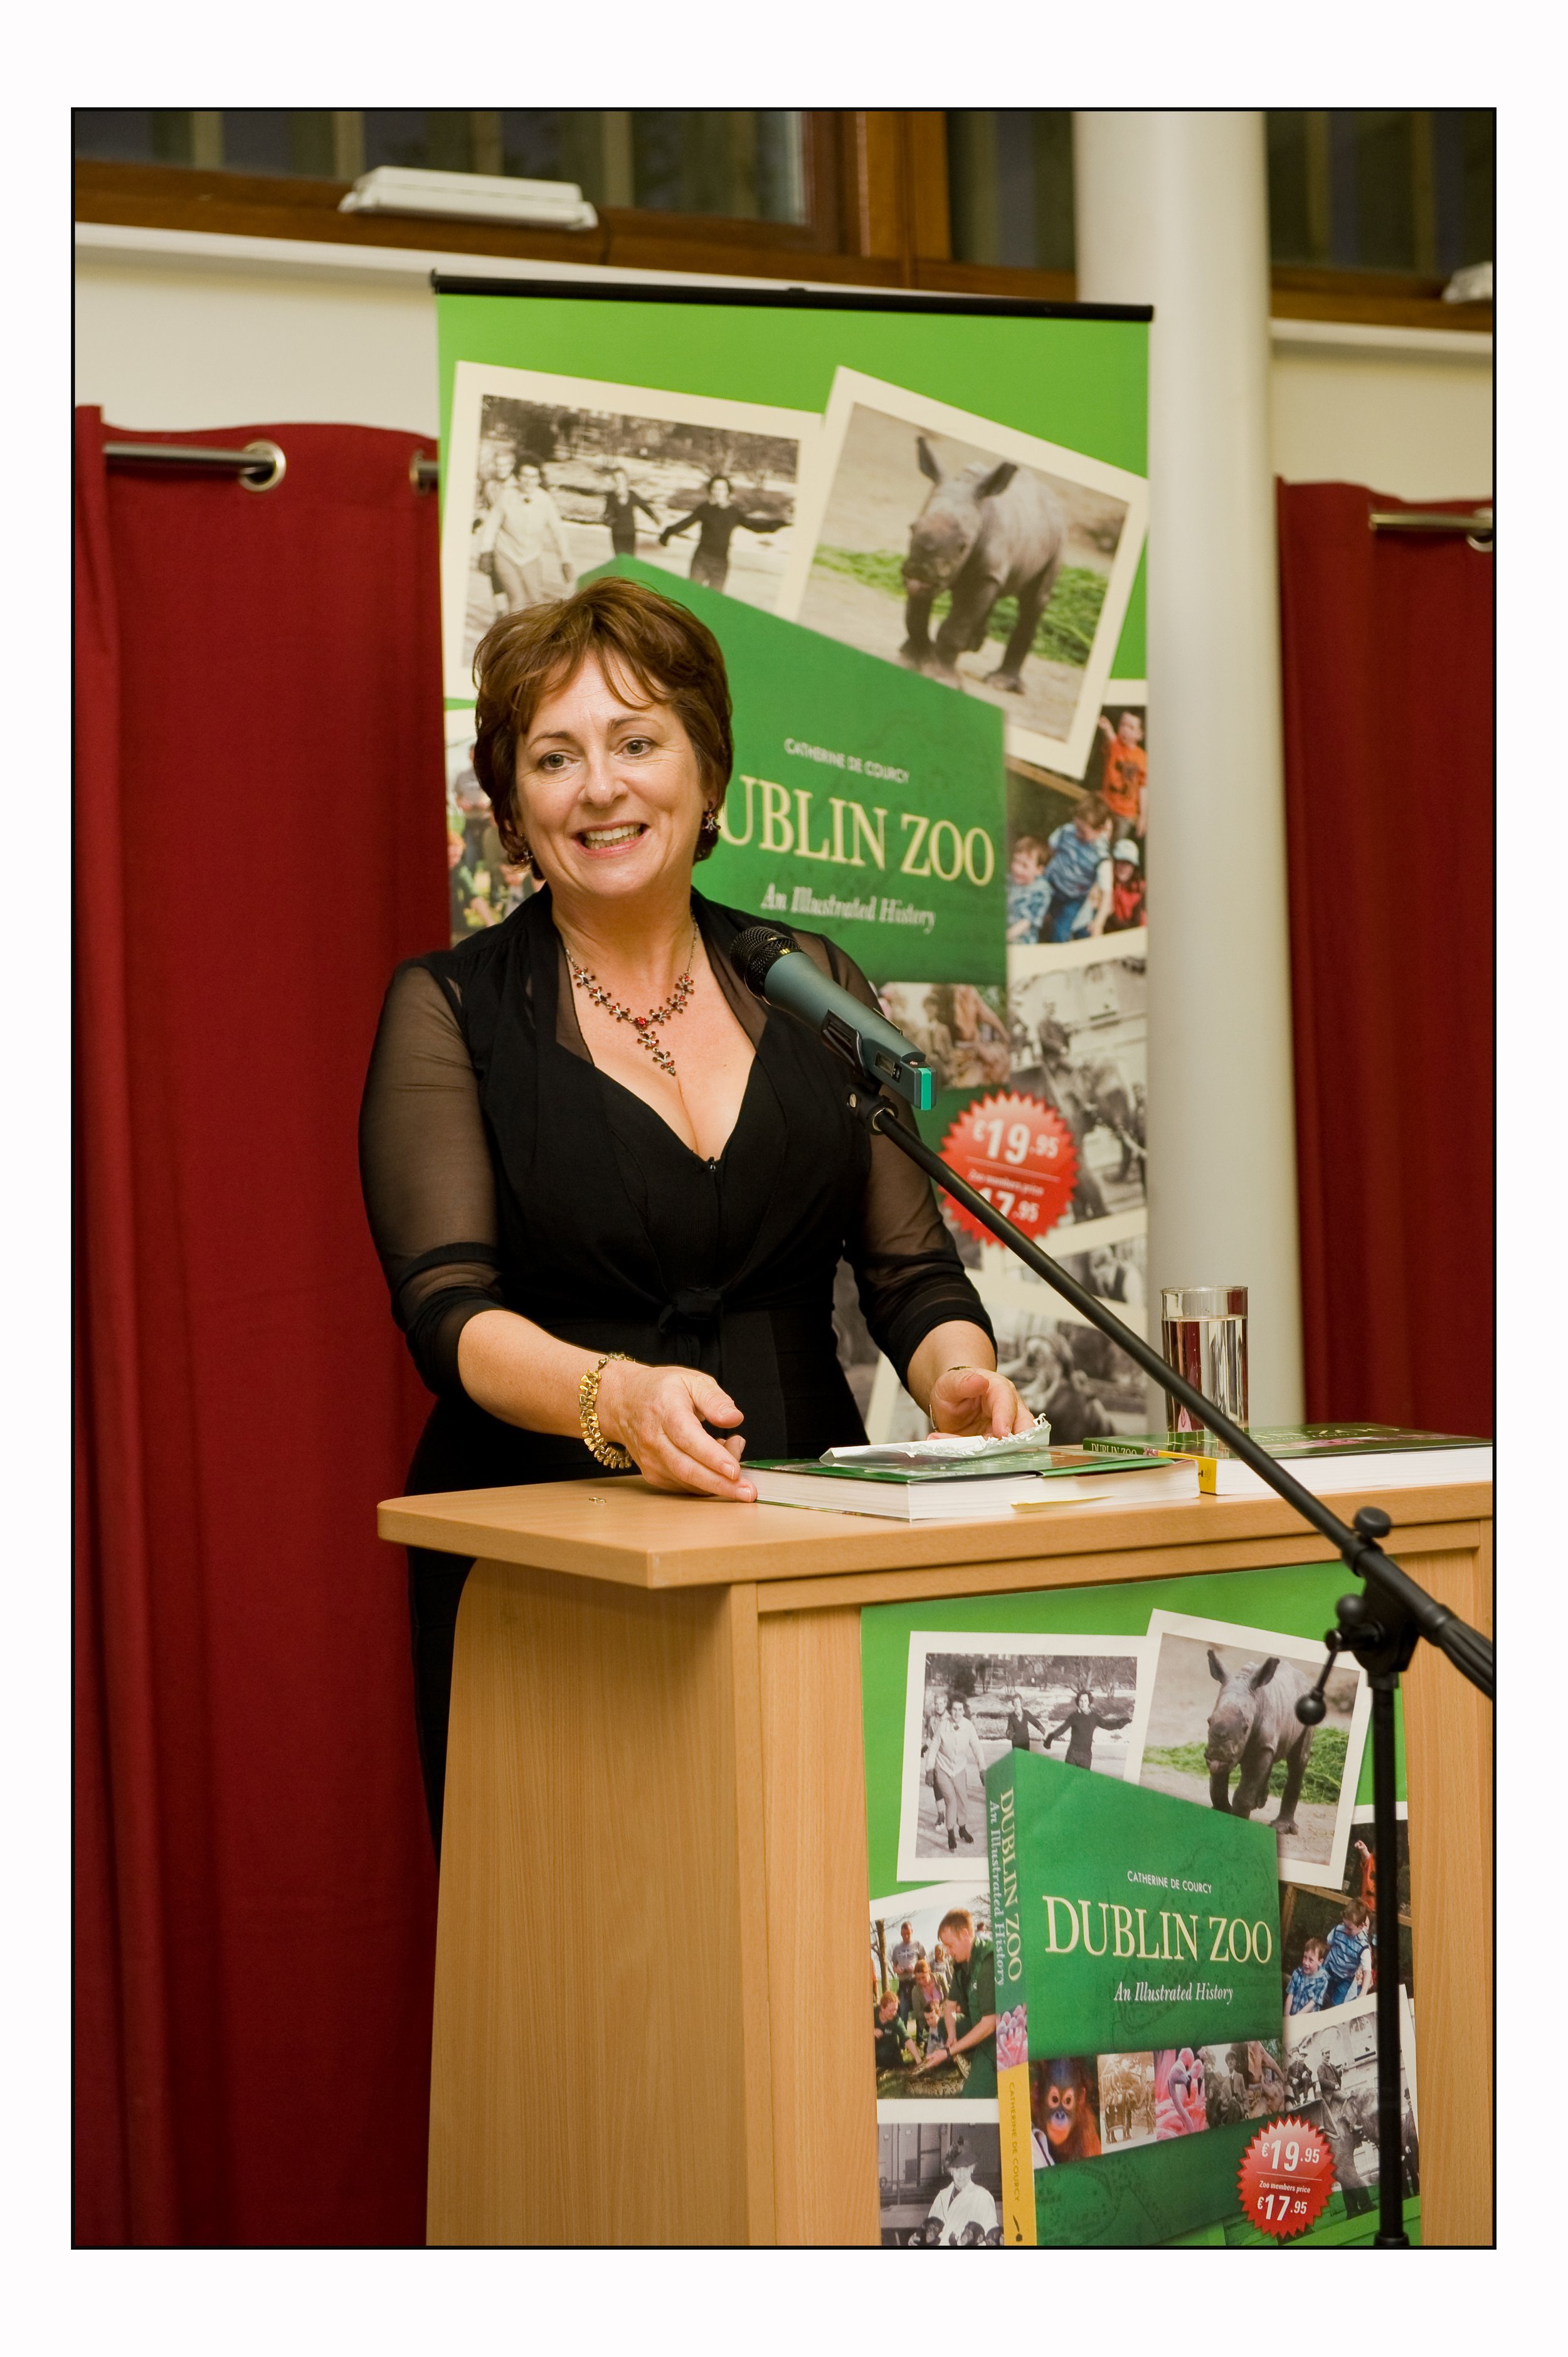 Catherine speaking at launch of Dublin Zoo history.jpg